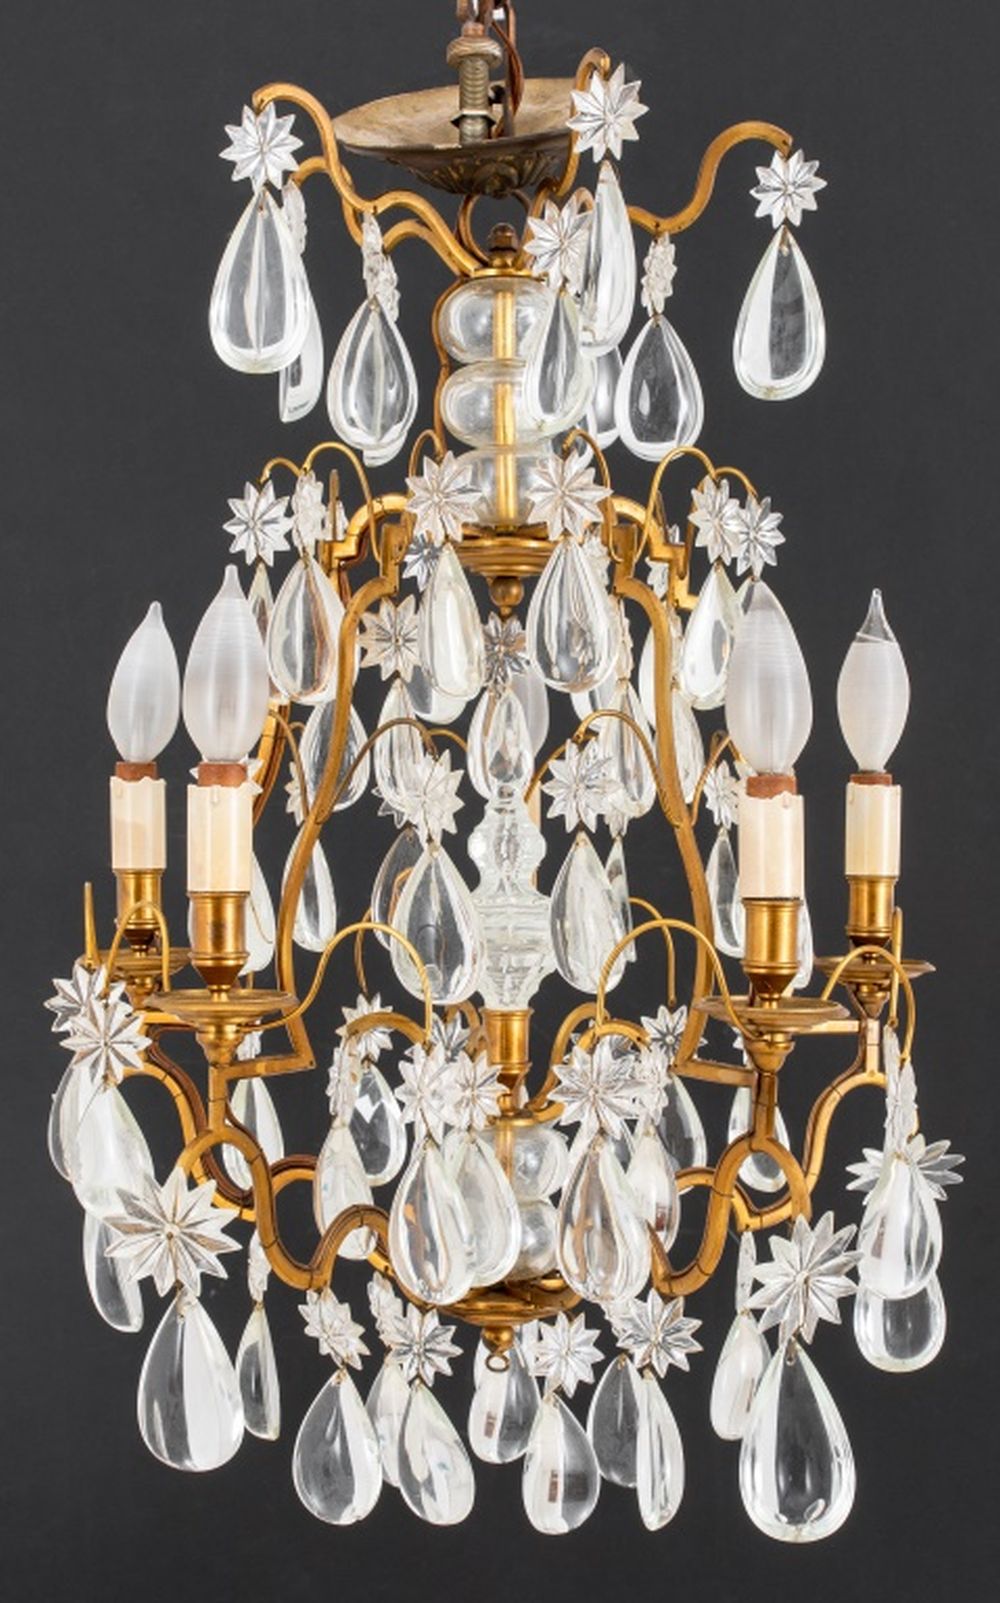 LOUIS XV STYLE CAGE FORM SIX LIGHT 2fc49f